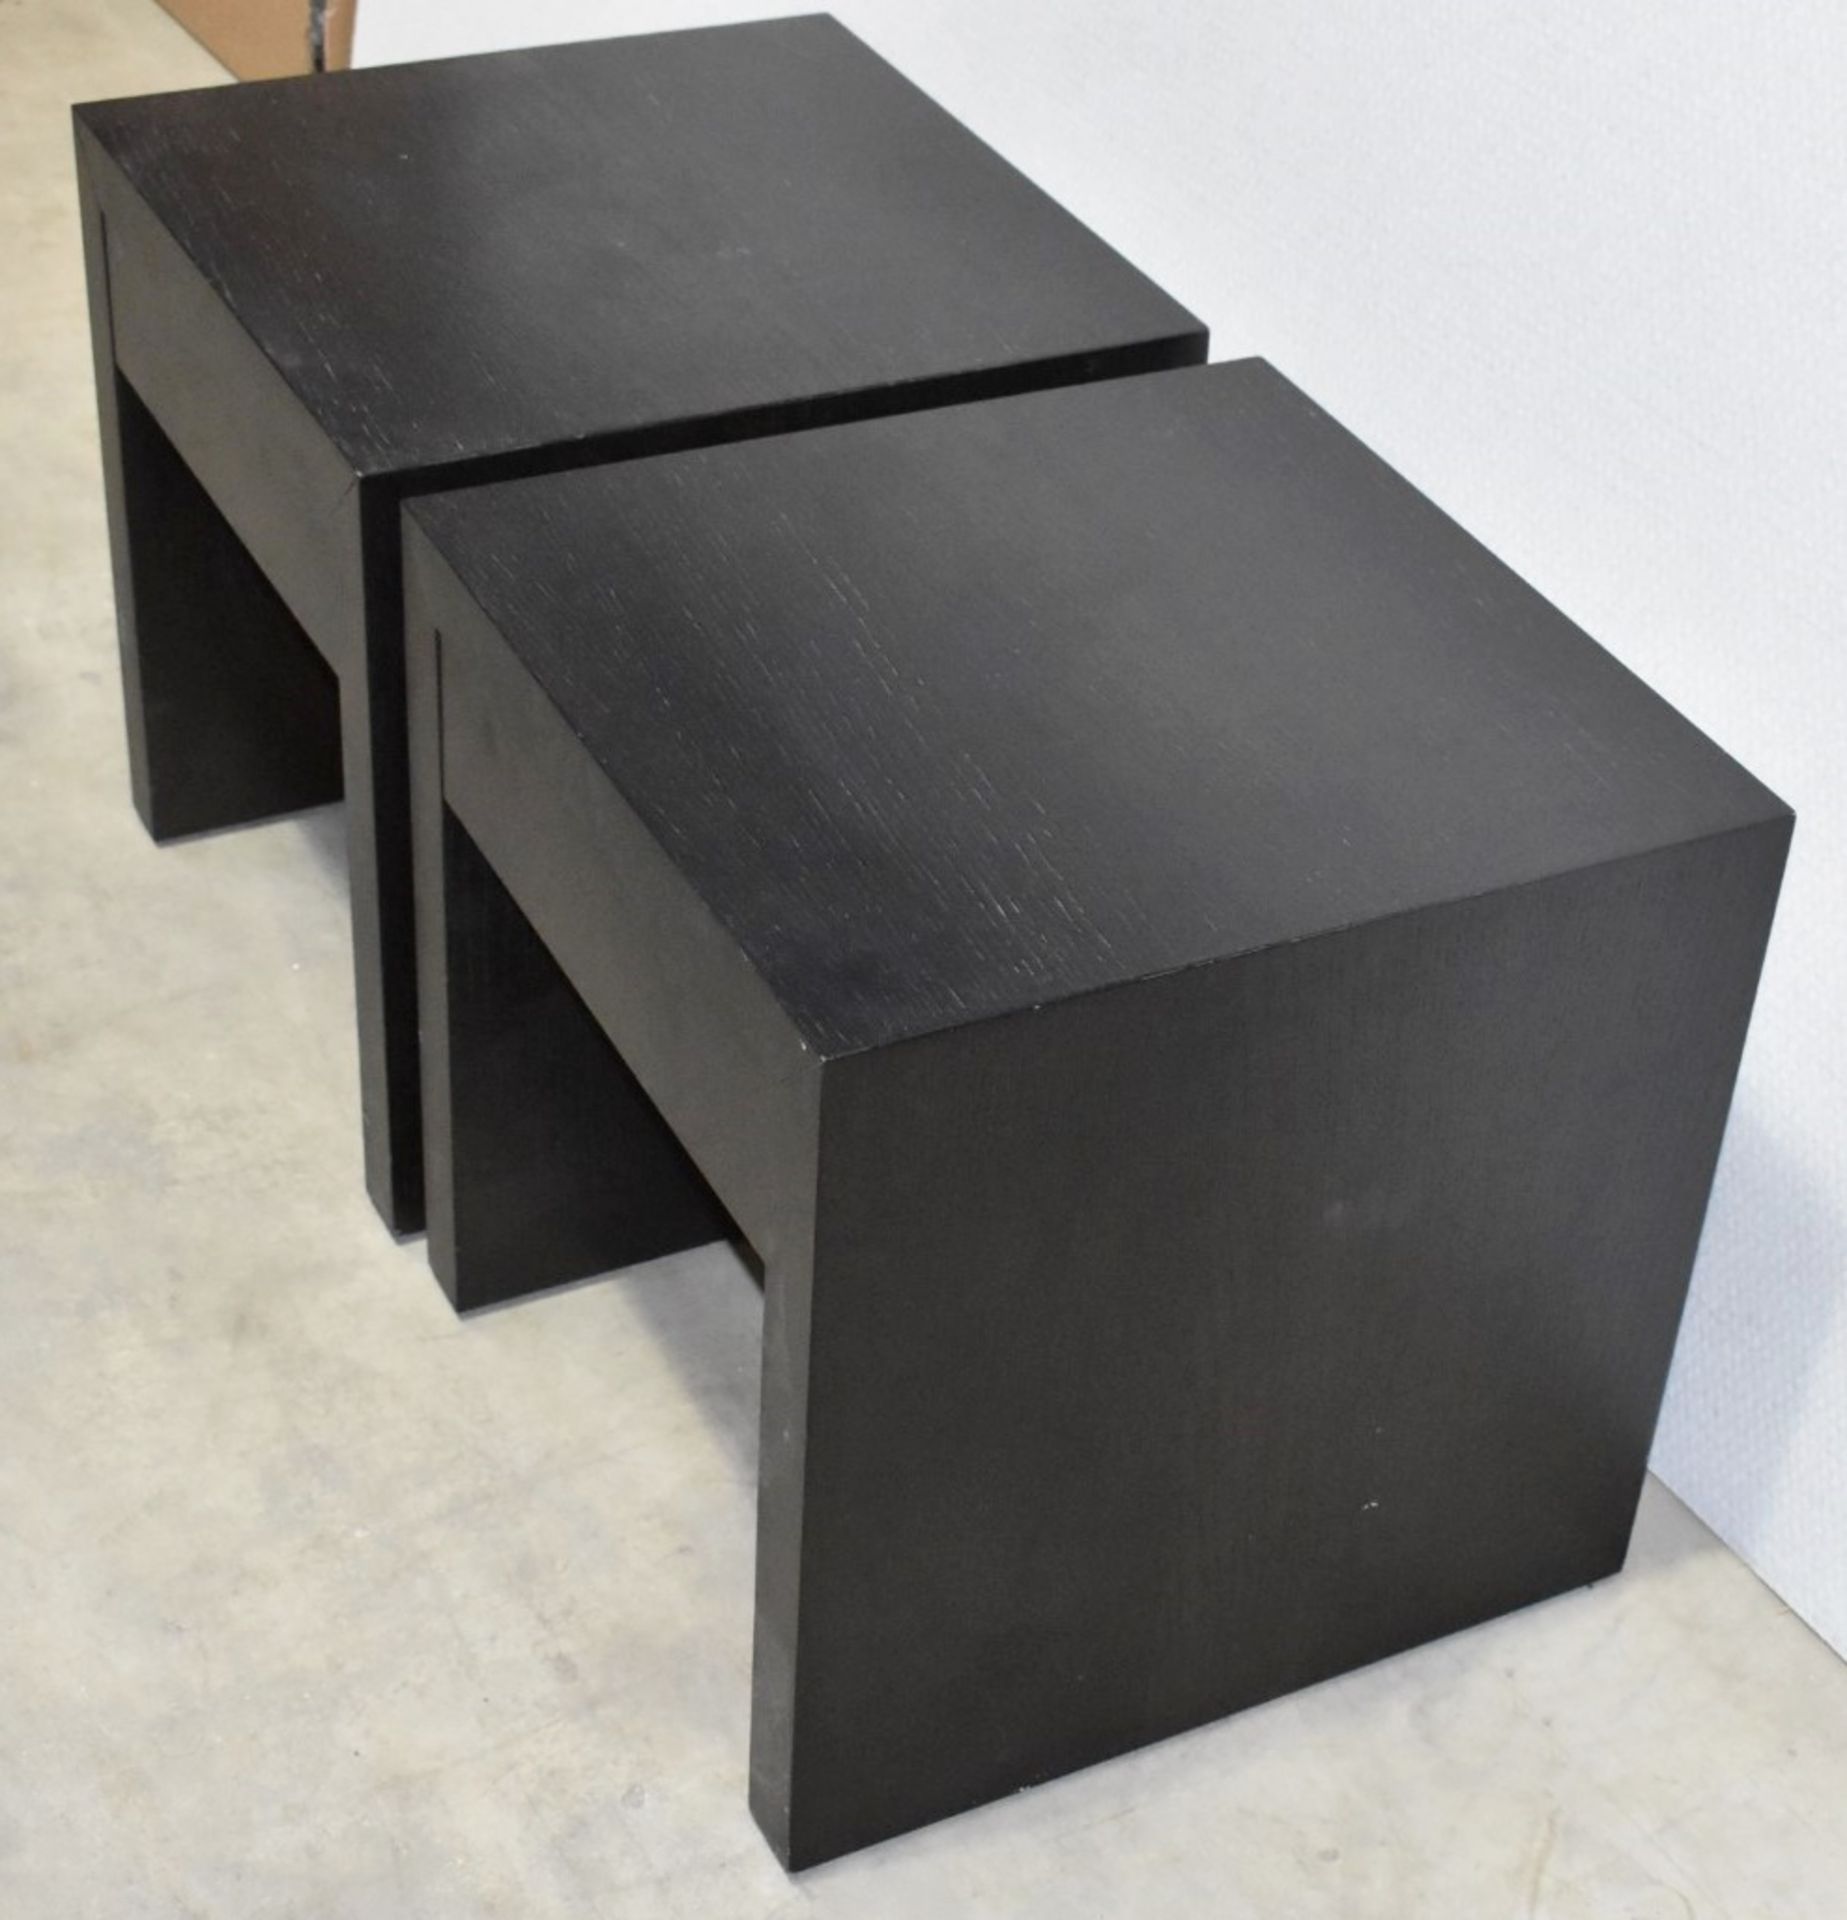 Pair of FENDI Modern Designer Wooden Bedside Cabinets Featuring Suede-style Lined 1-Drawer Storage - Image 12 of 15